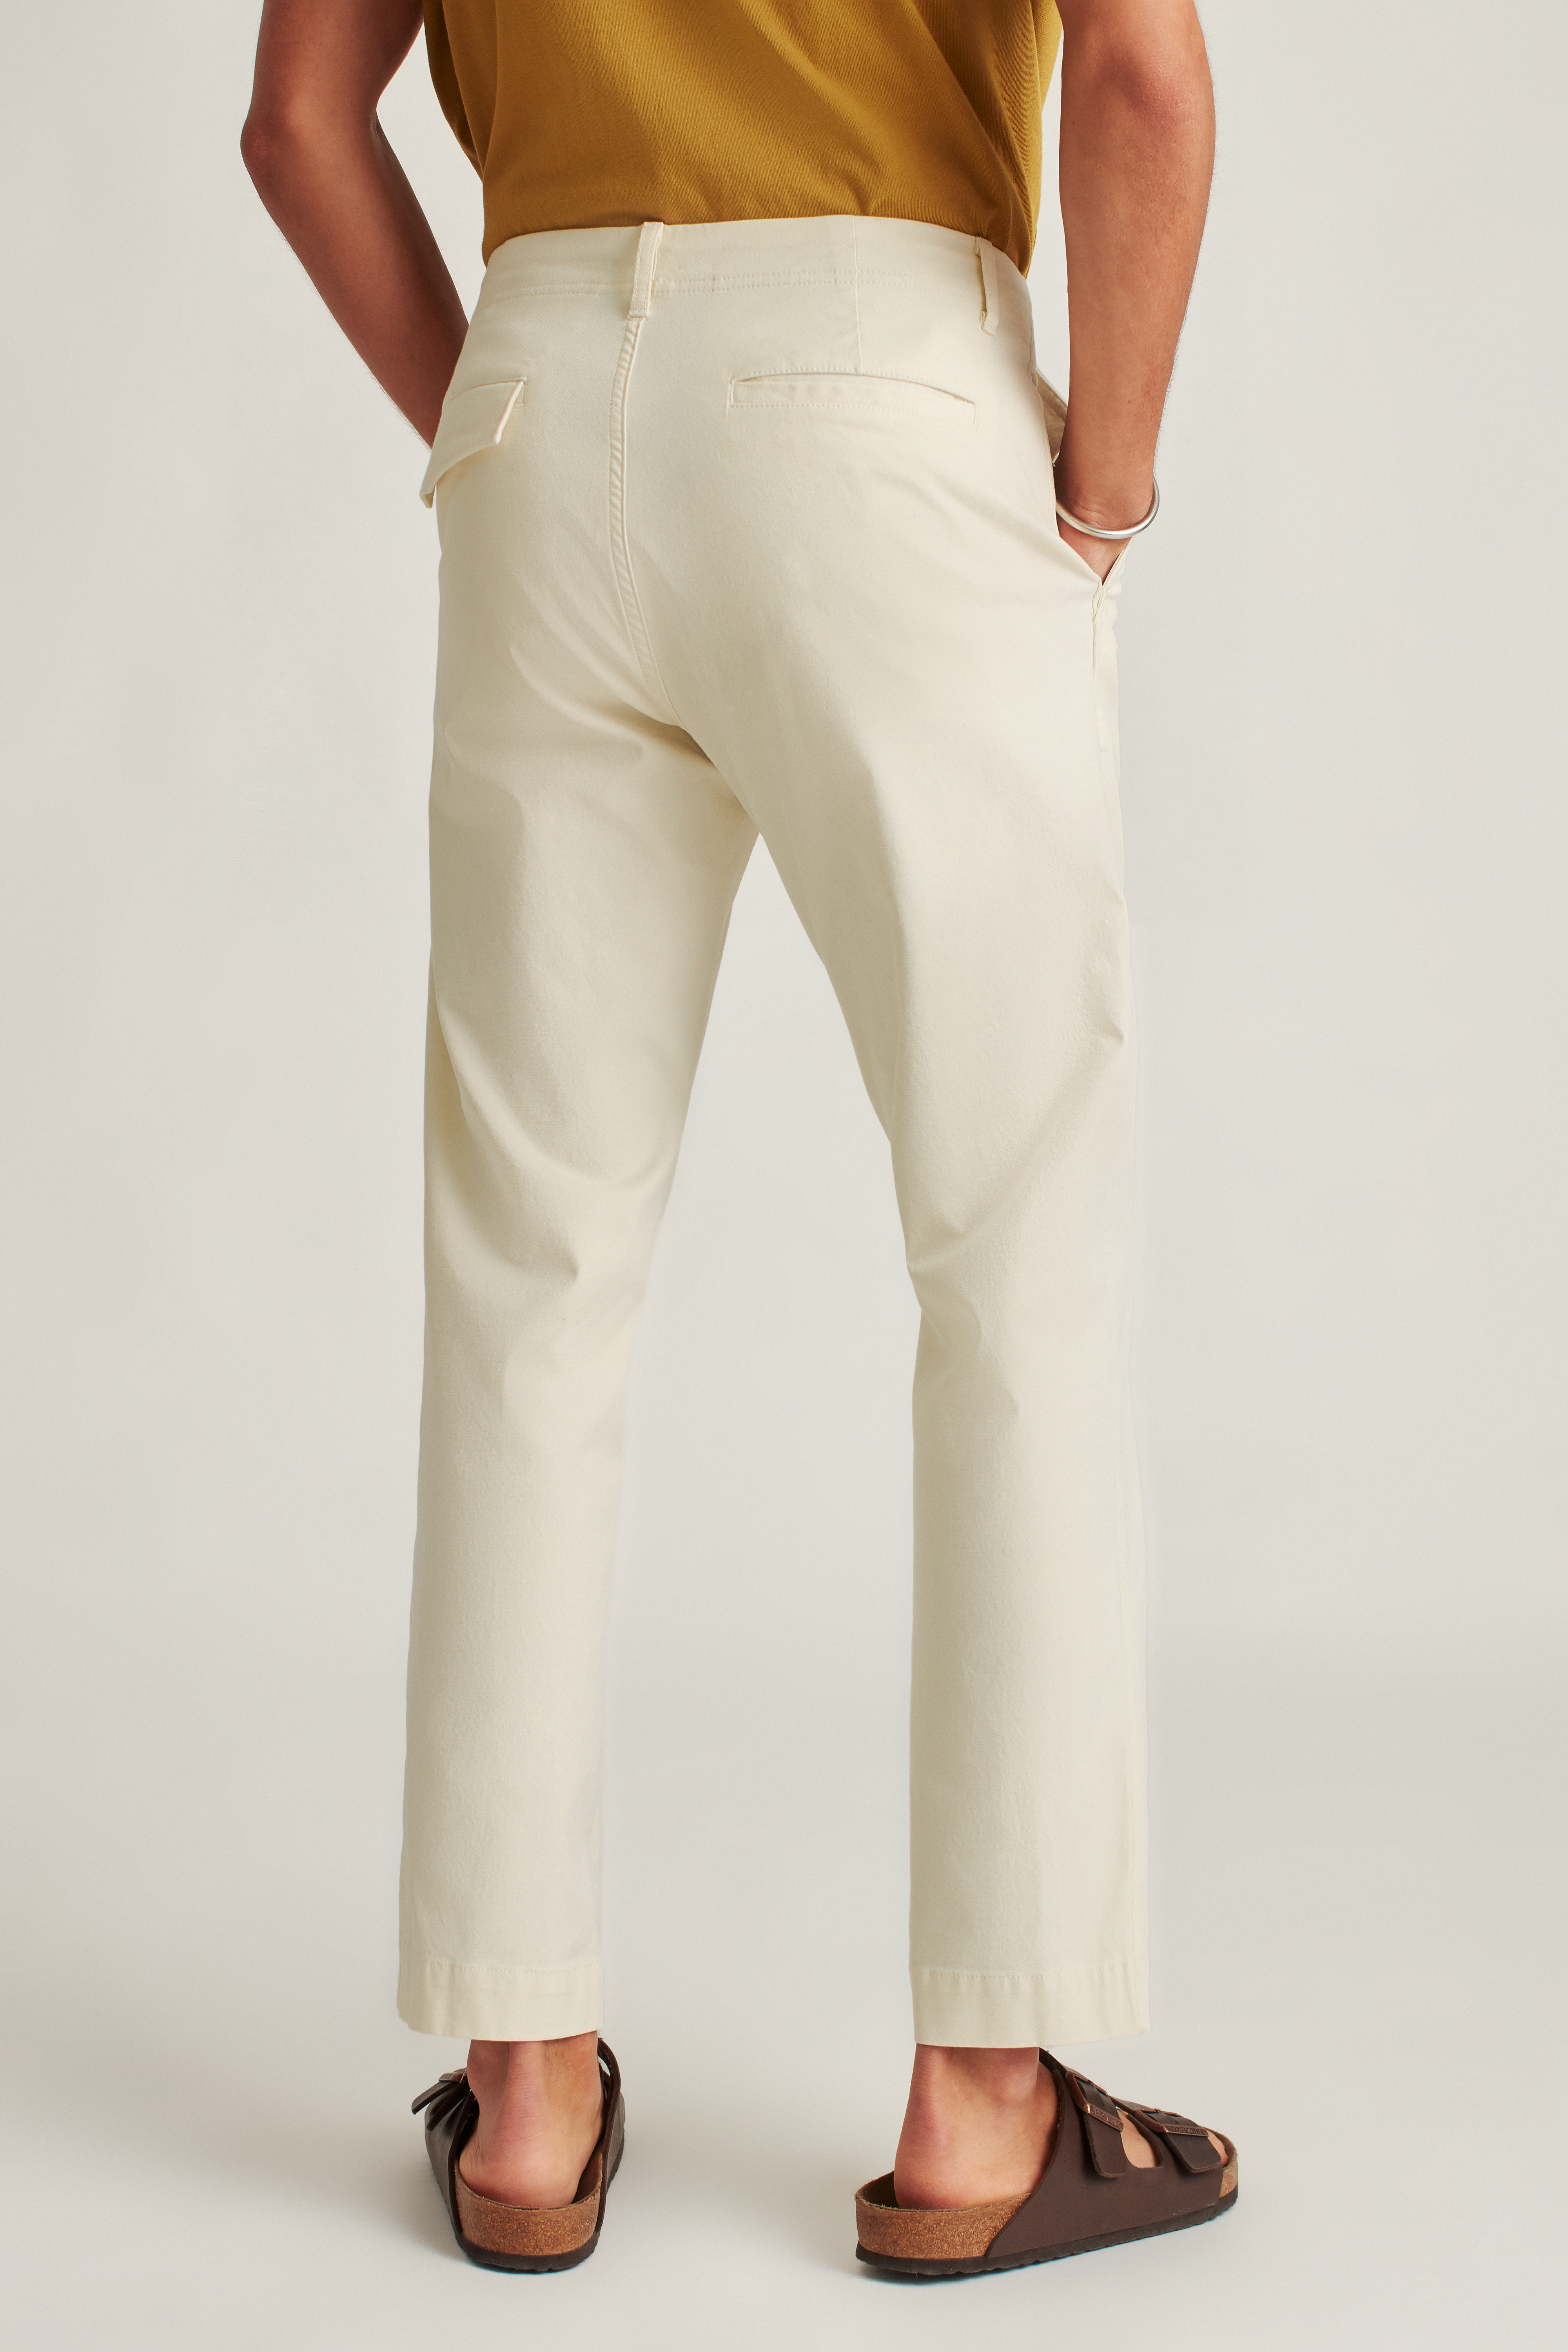 The Relaxed Straight Chino | Bonobos